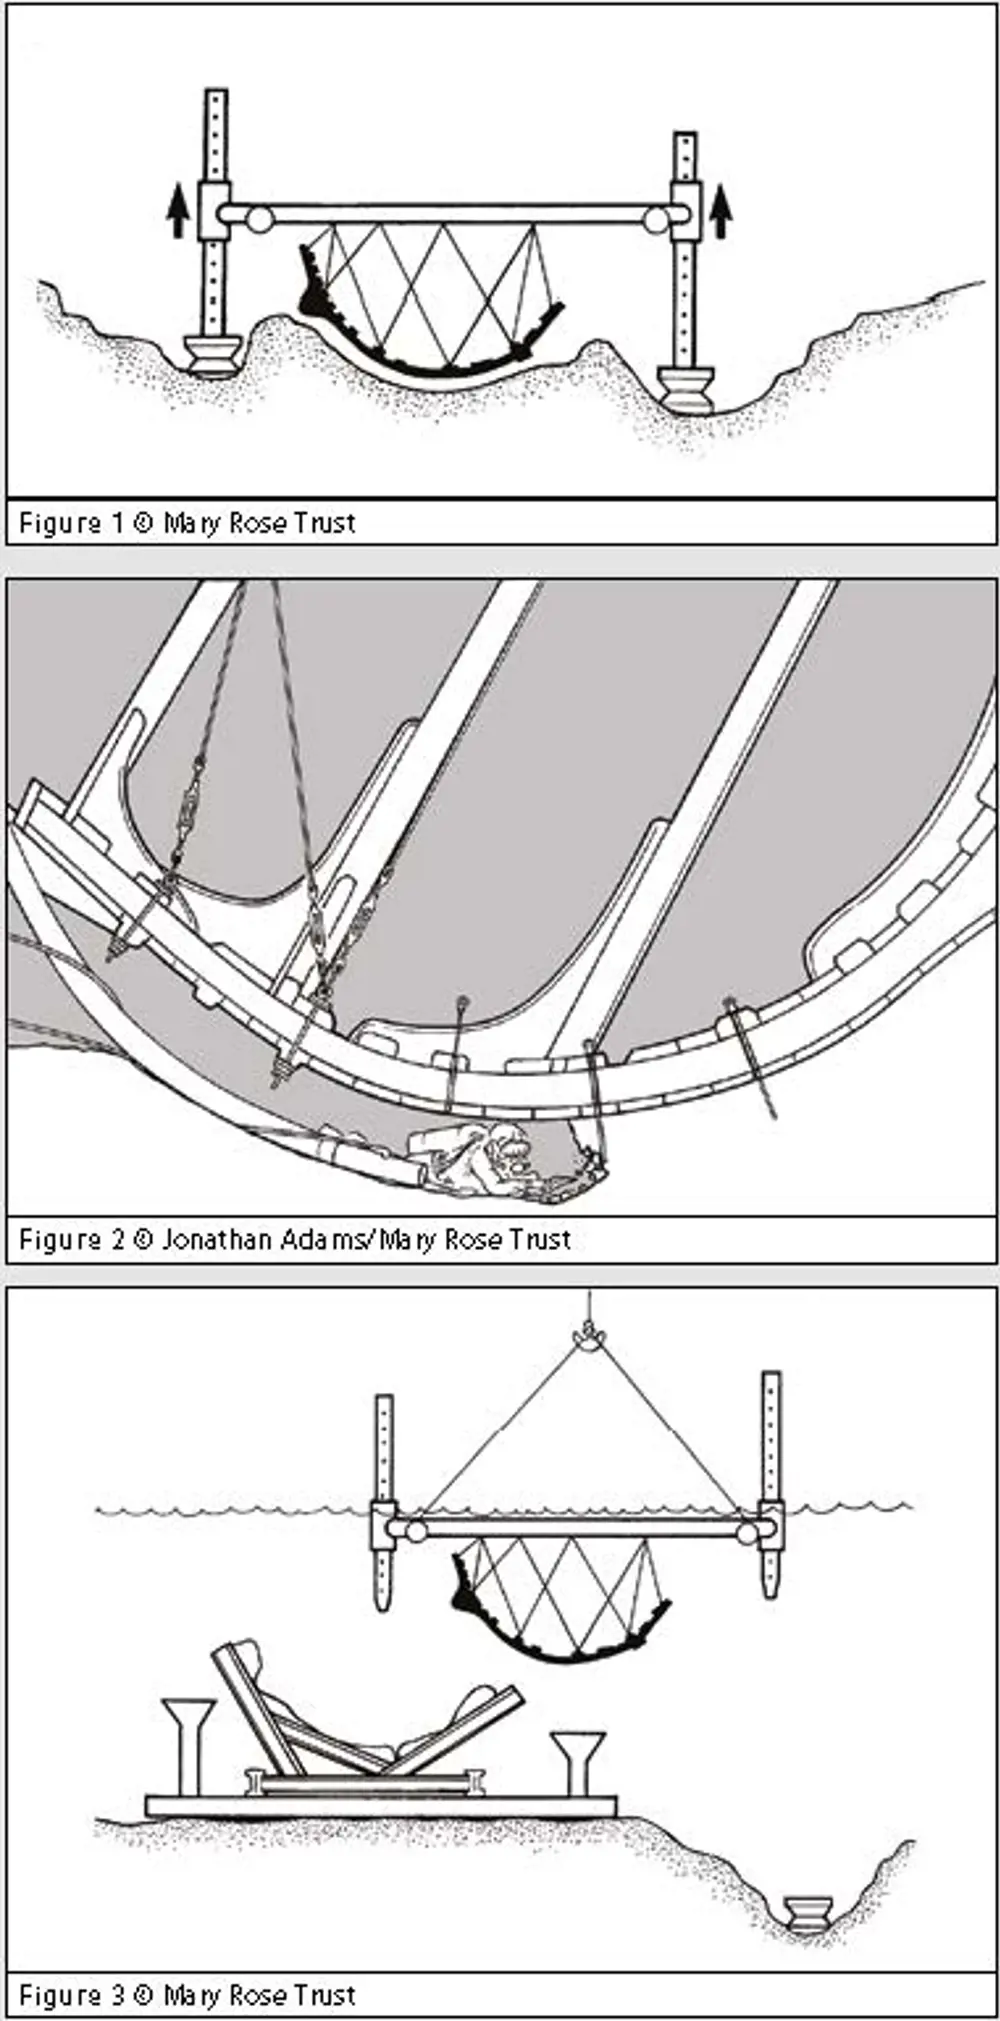 A diagram of how the Mary Rose was lifted out of the ocean,